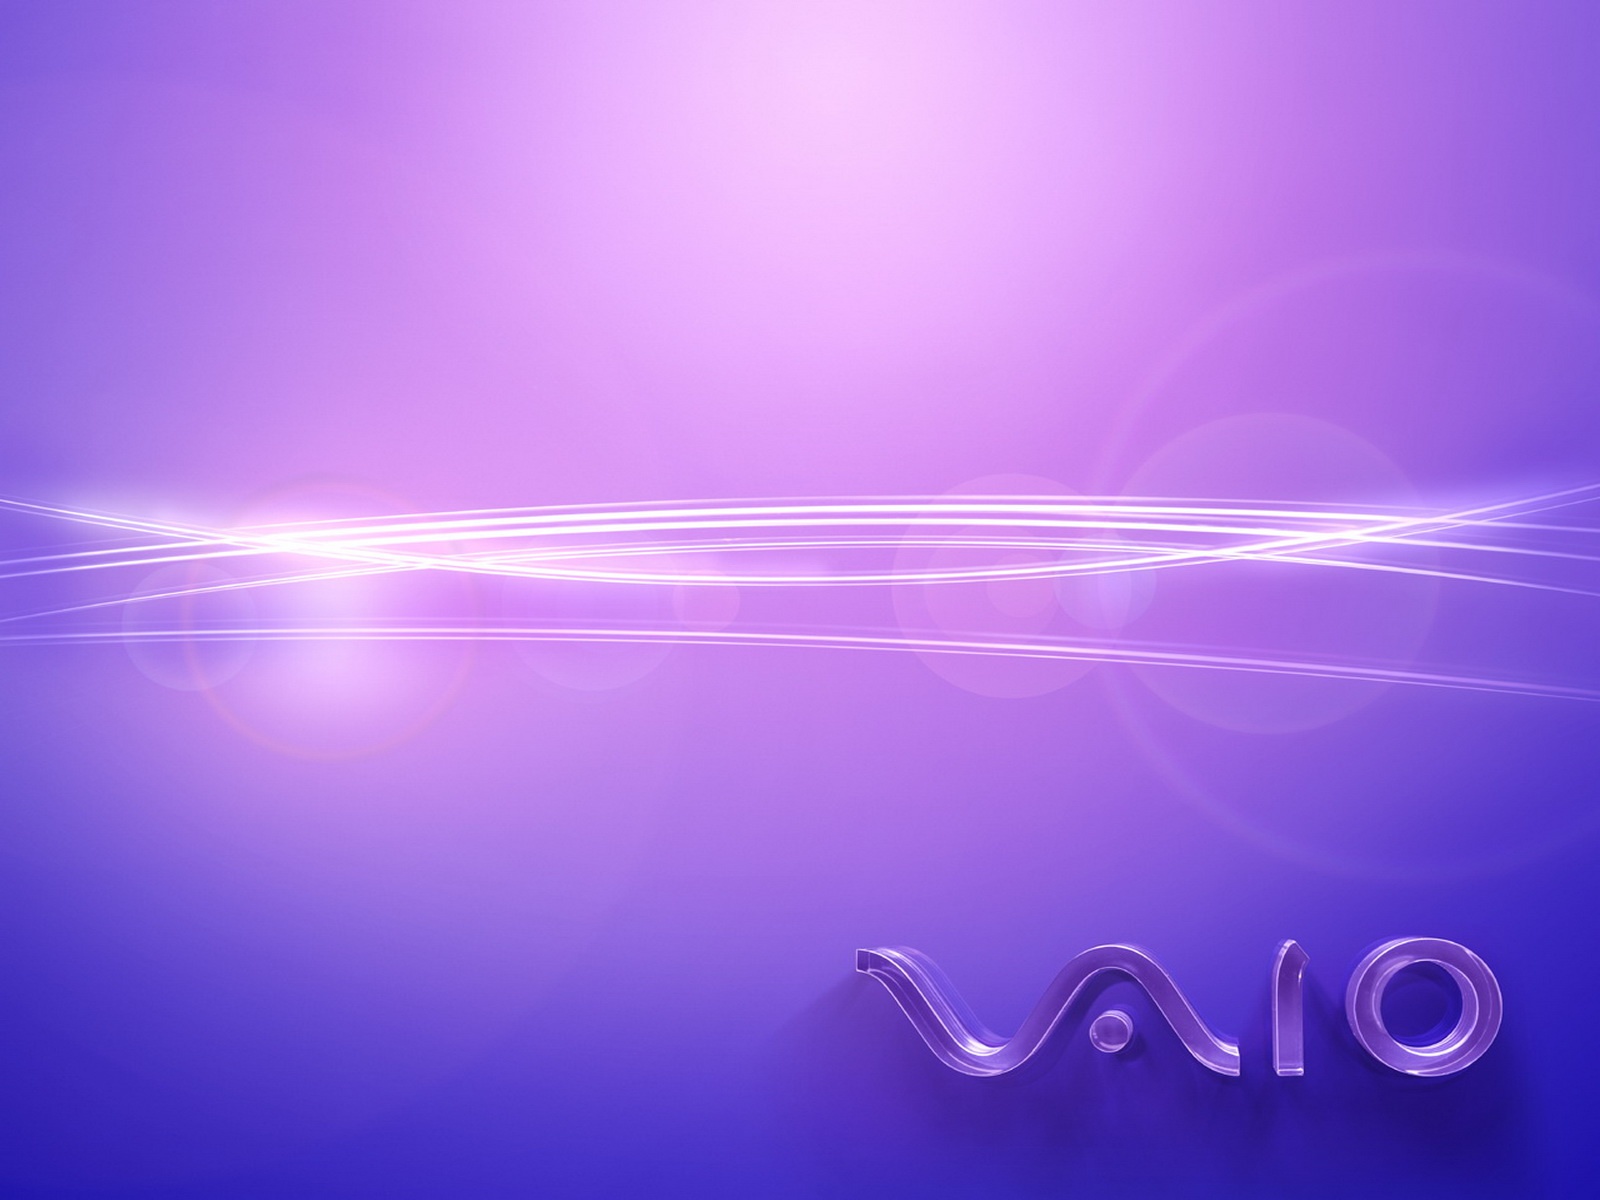 Sony Vaio 13 Wallpapers In Jpg Format For Free Download